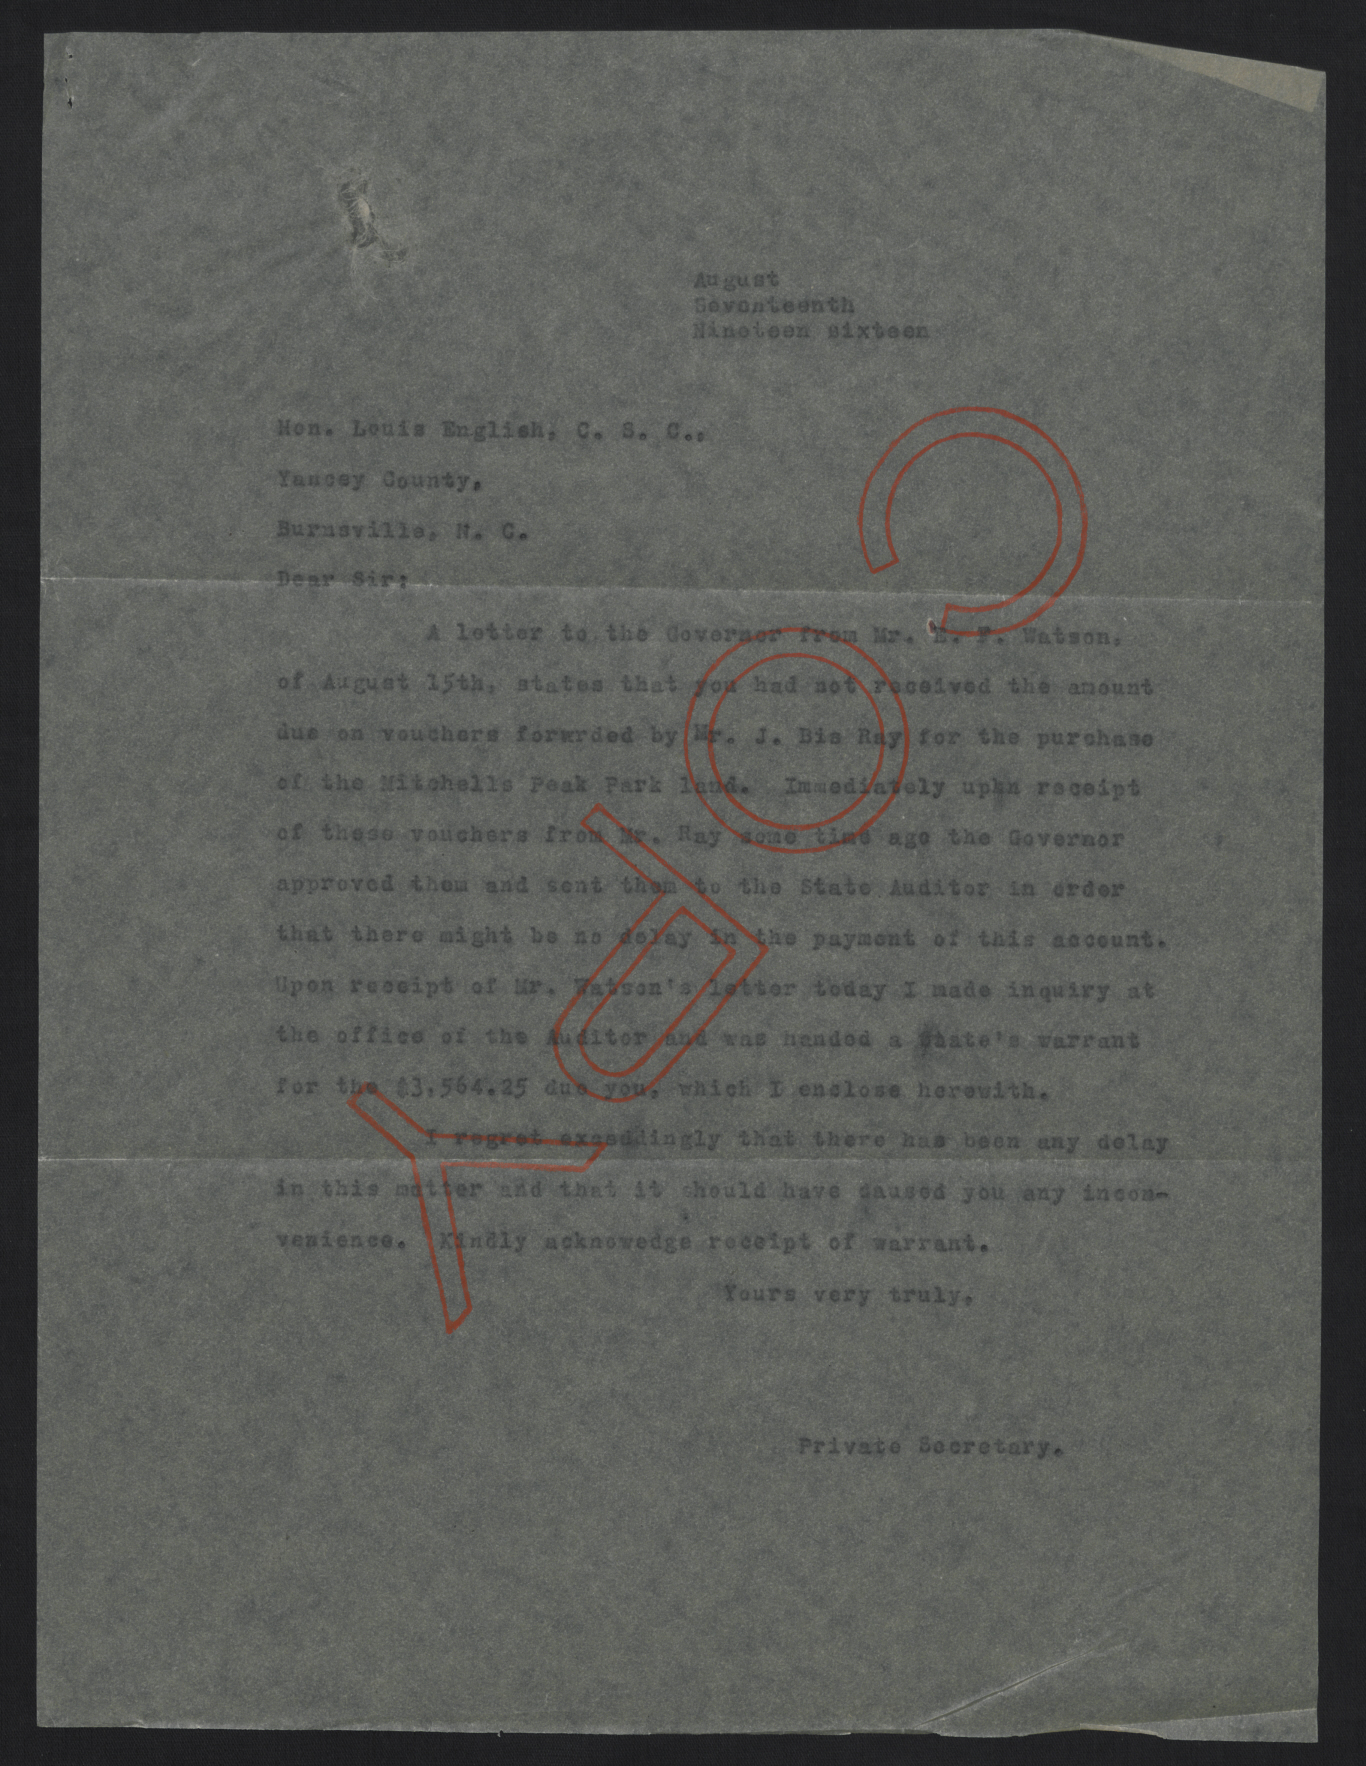 Letter from Jones to English, August 17, 1916